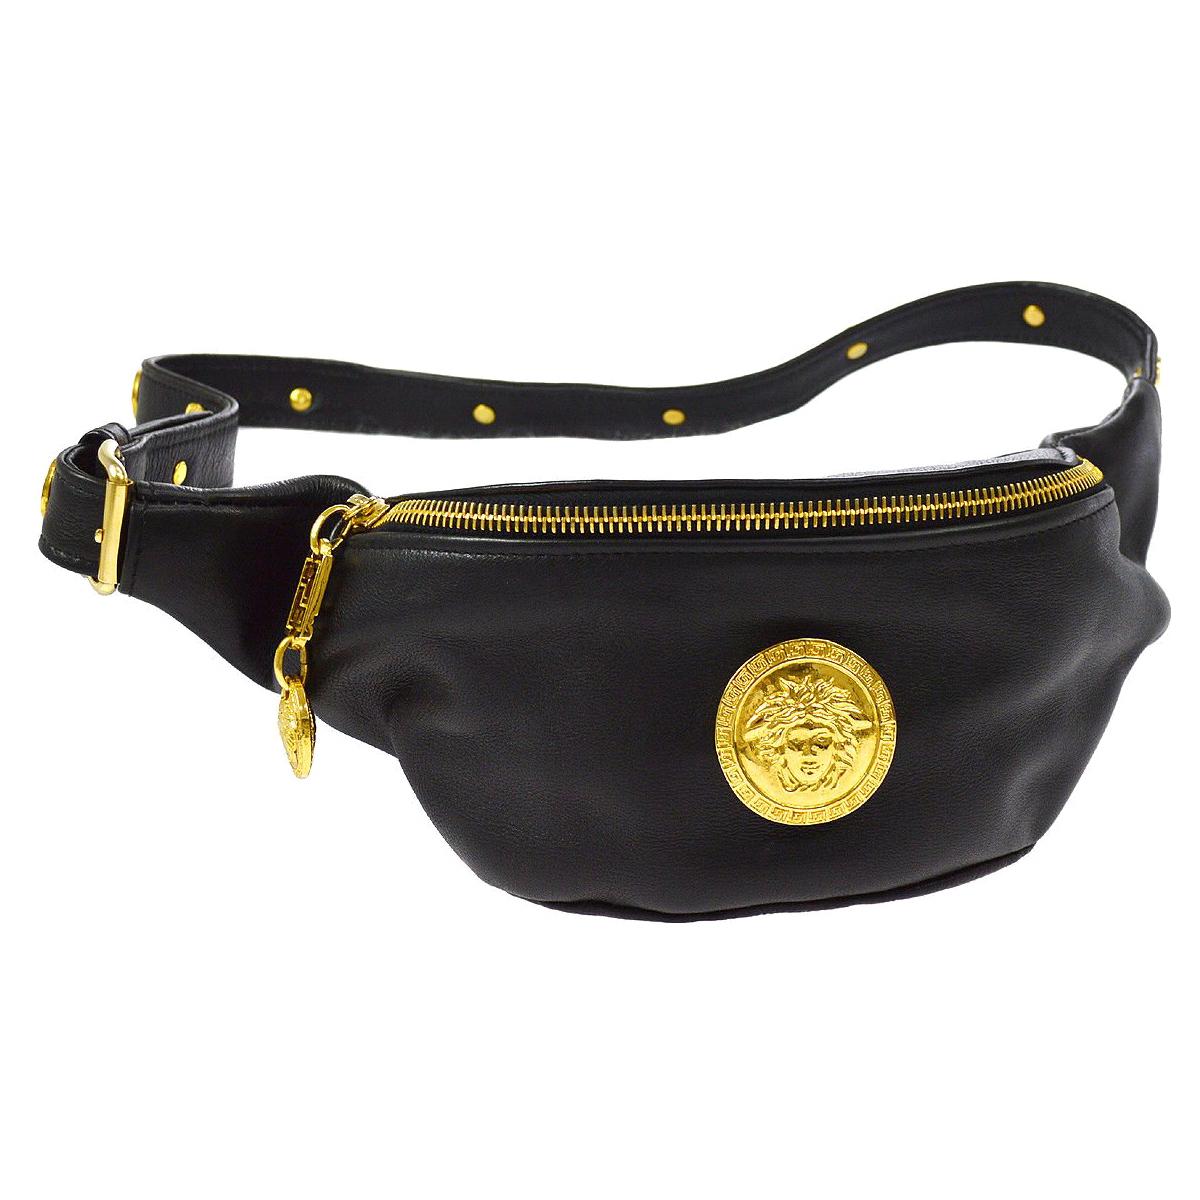 Gianni Versace Couture Black Leather Gold Charm Fanny Pack Waist Belt Bag